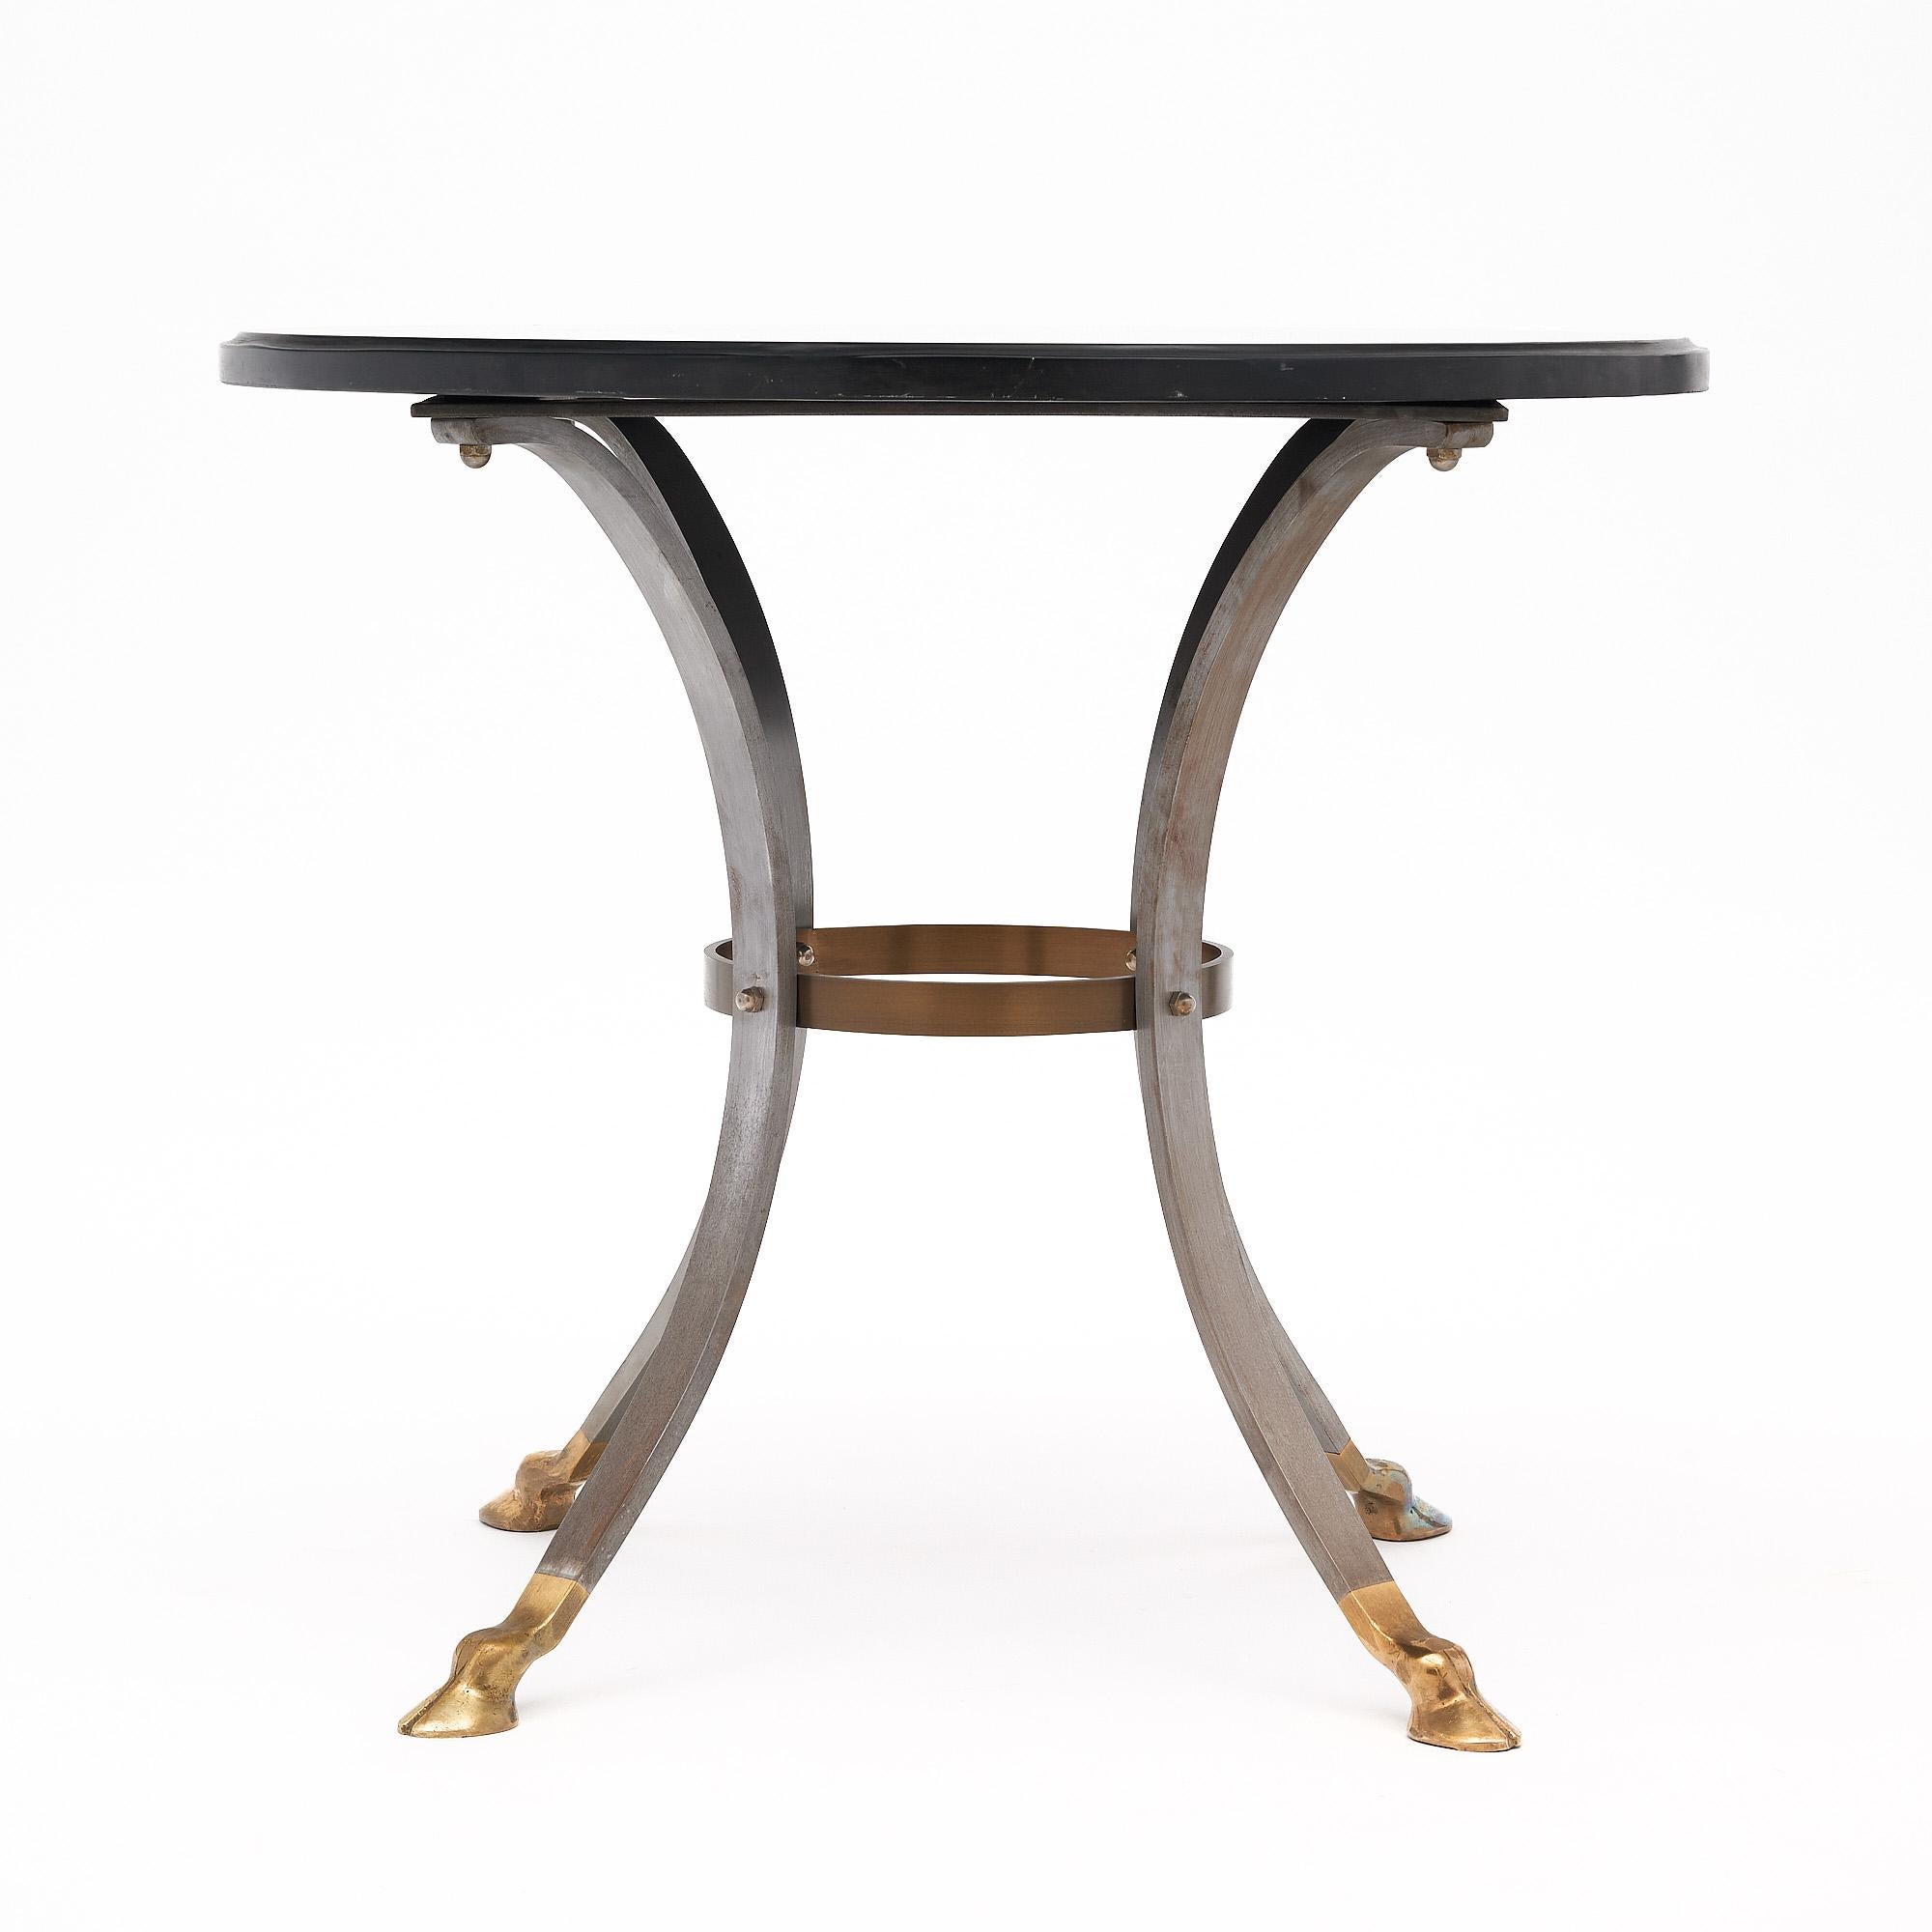 Side table from the Art Deco period in France. This table features a circular black slate top. It is supported by a base of brushed steel with a spheric brass stretcher and finely cast gilt bronze hoof feet.